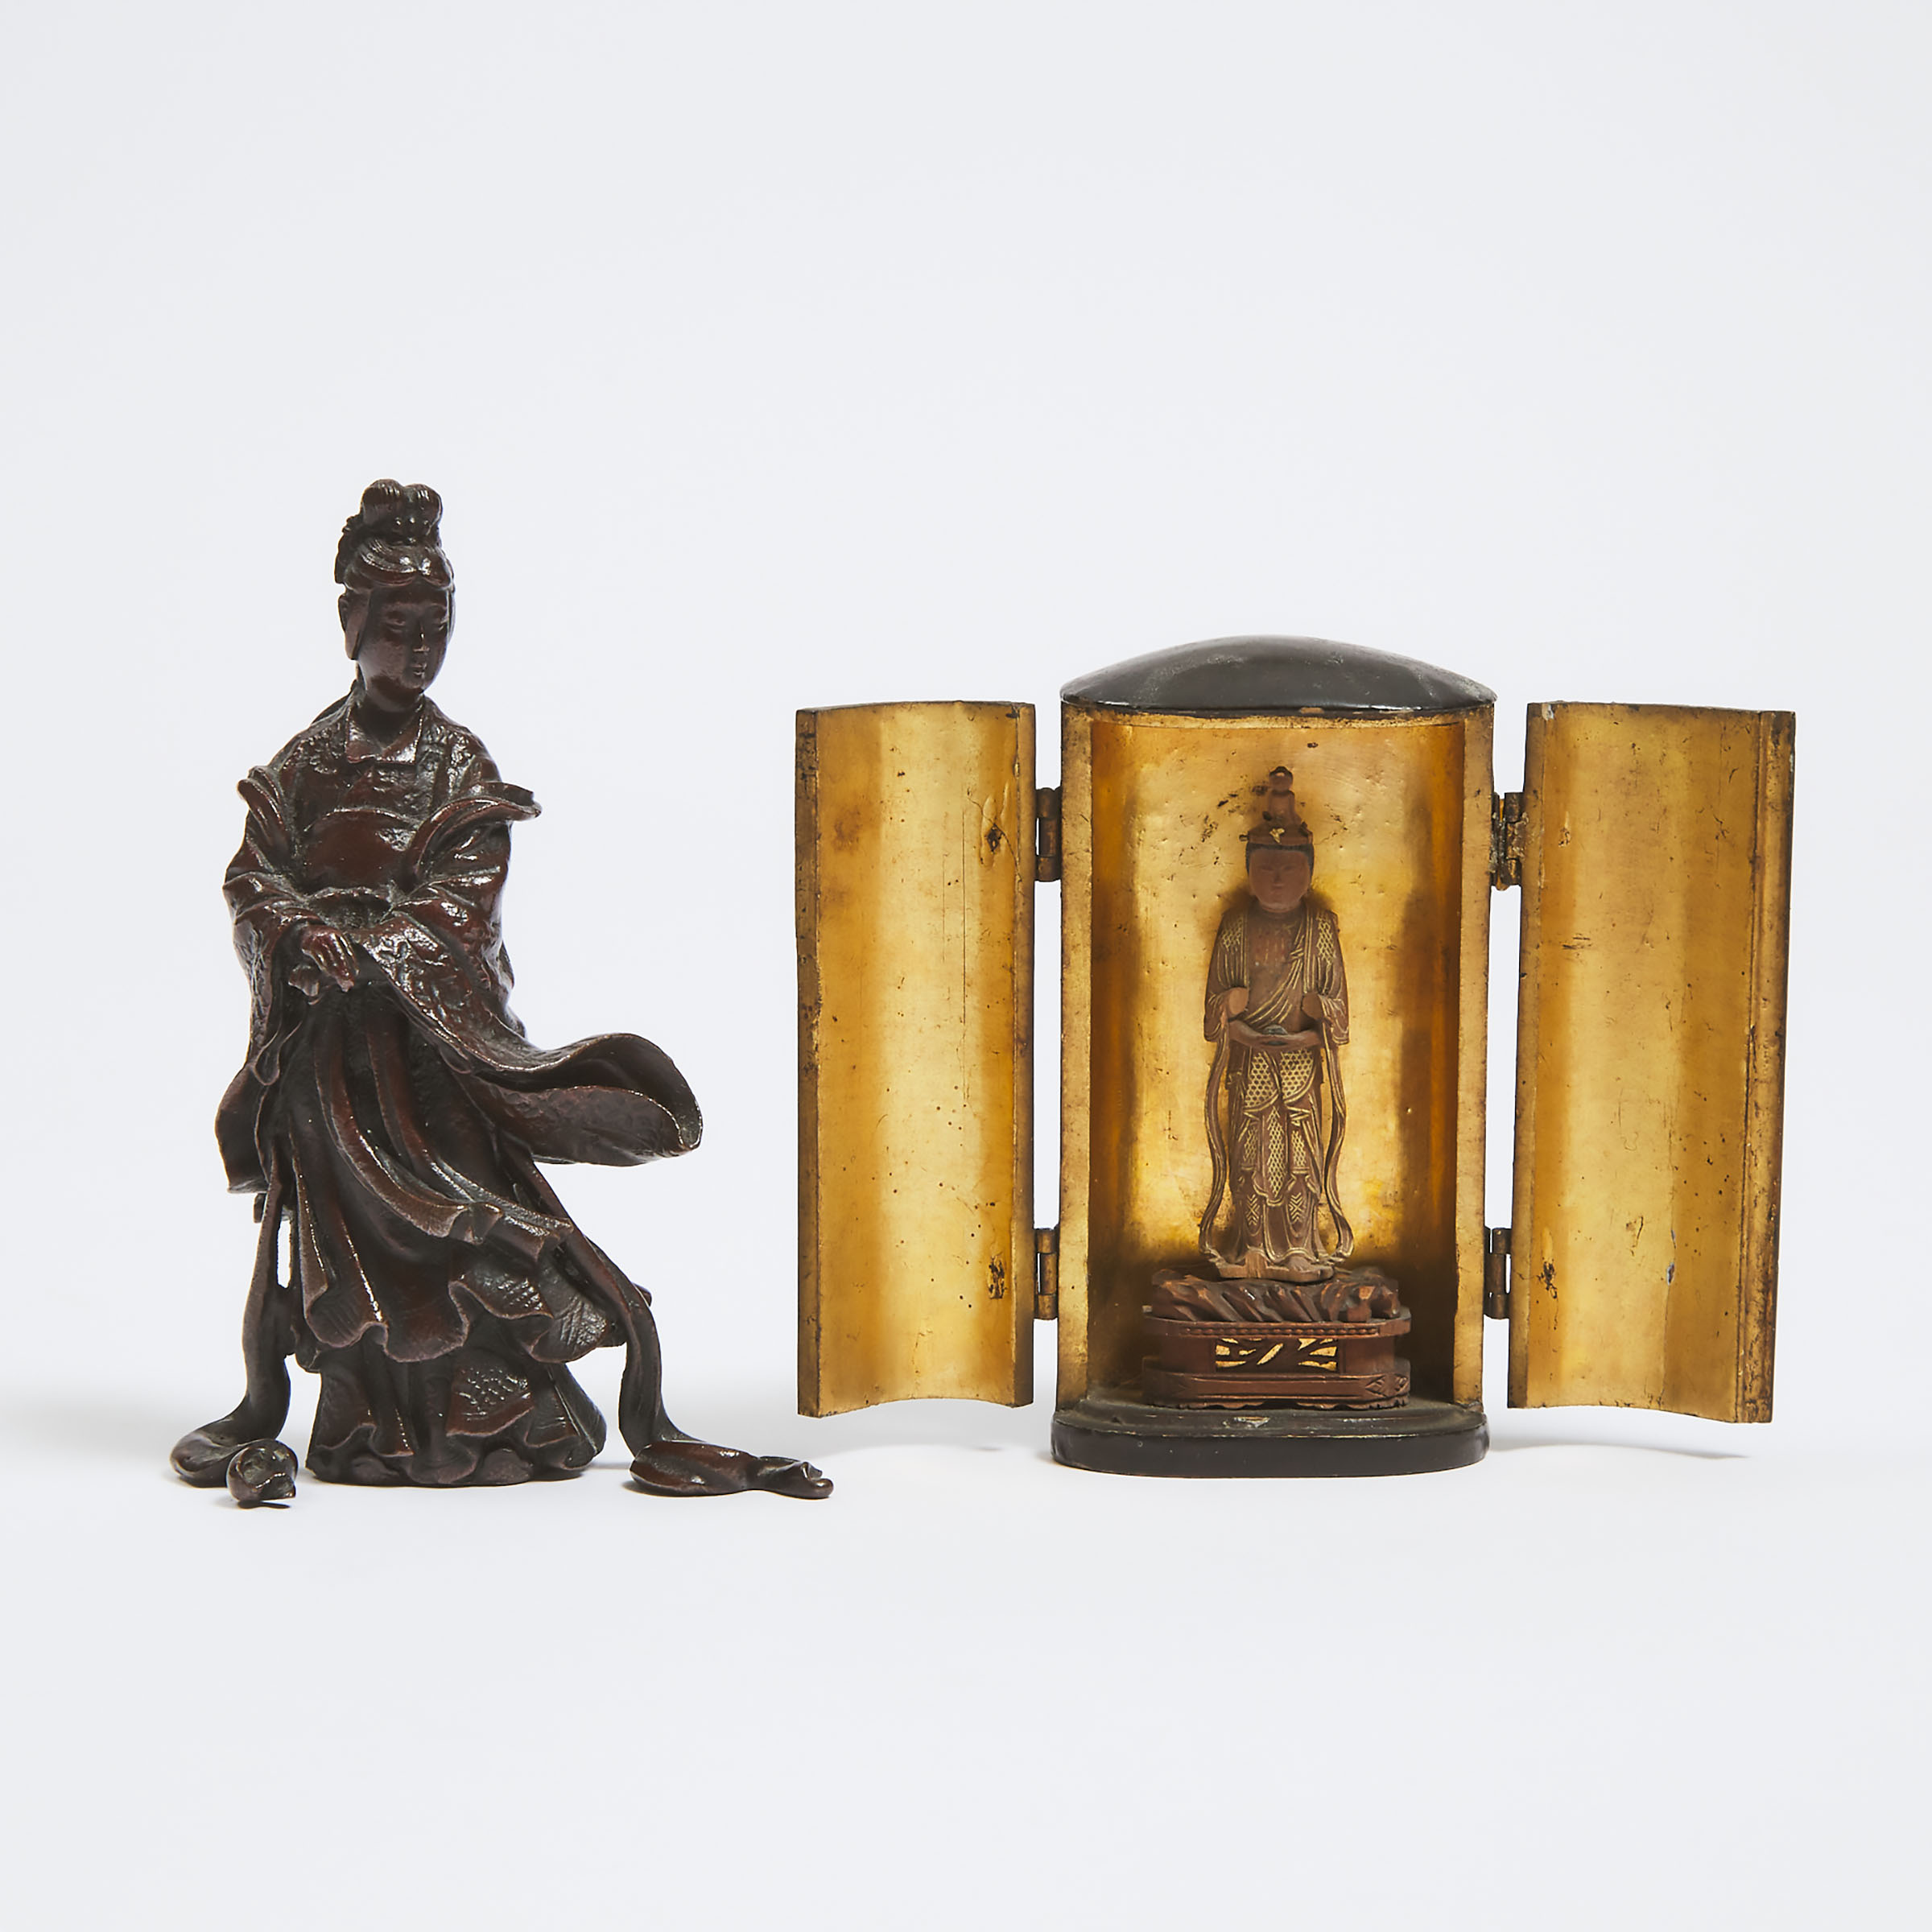 A Miniature Portable Zushi (Portable Shrine) With Kannon (Avalokiteshvara), Together With a Bronze Okimono/Scroll Weight of a Chinese Lady, Early to Mid 20th Century